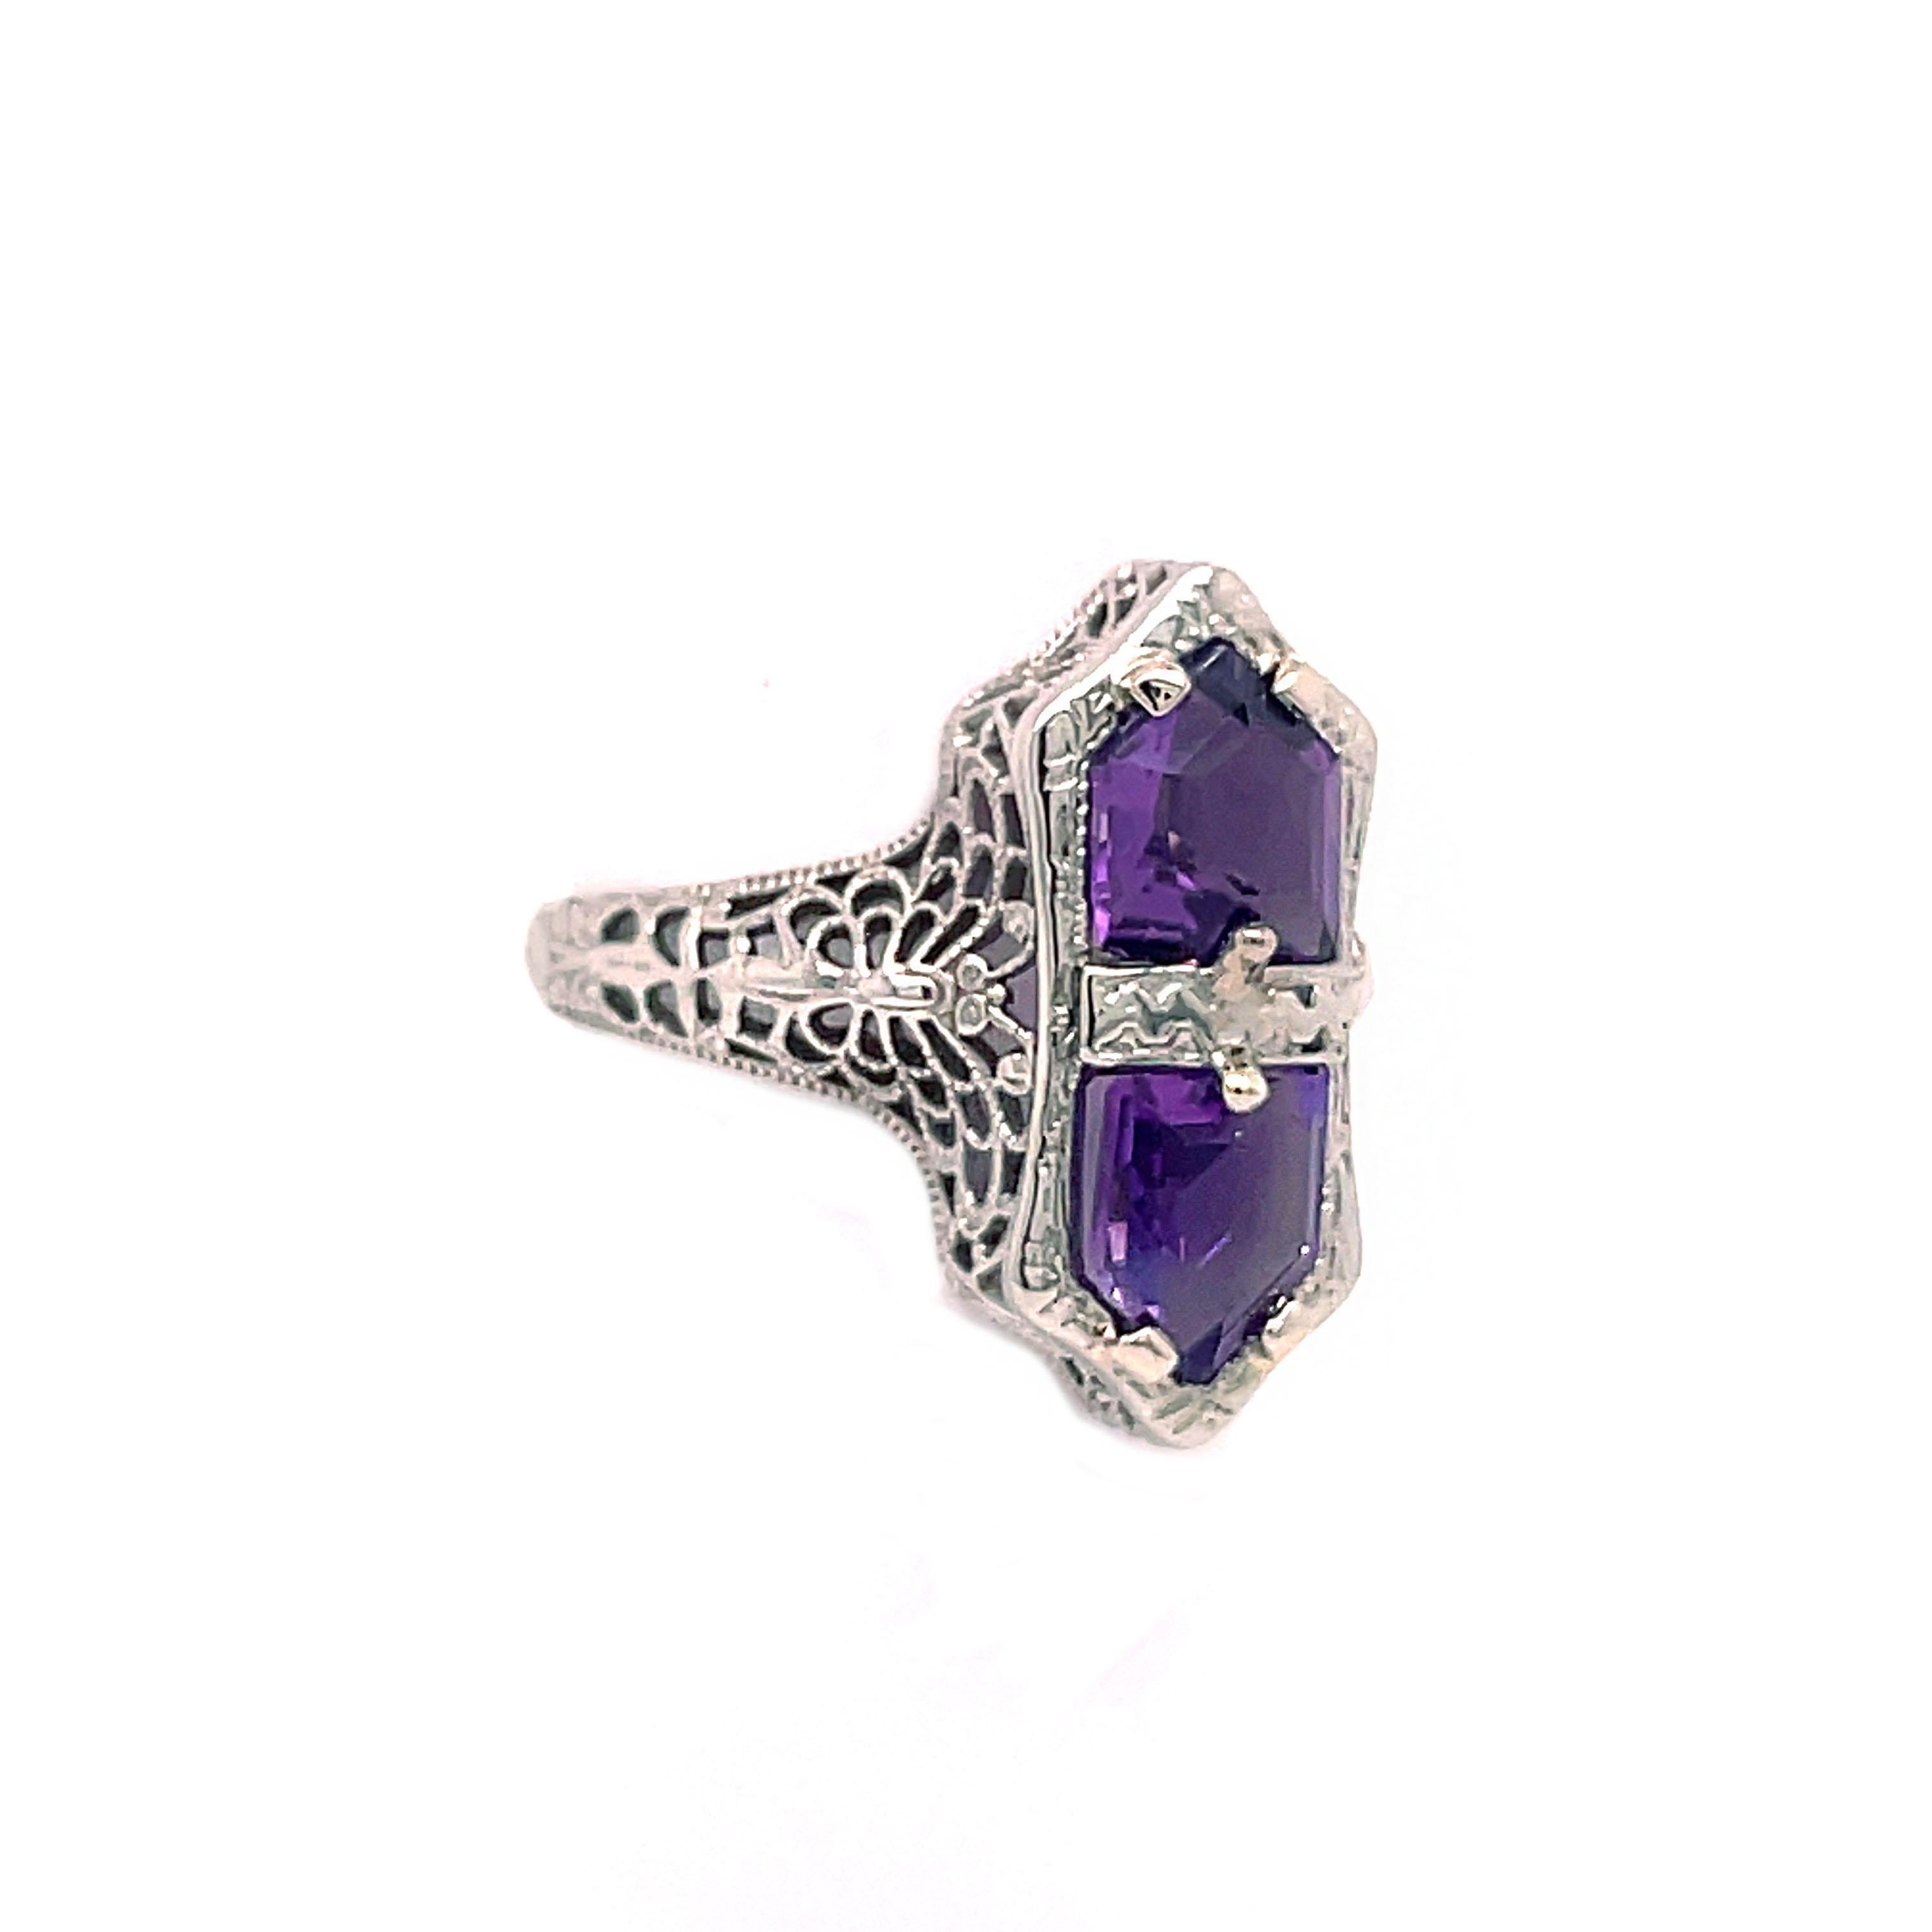 1920s 14K White Gold Filigree 3 Carat Amethyst Ring In Excellent Condition For Sale In Lexington, KY